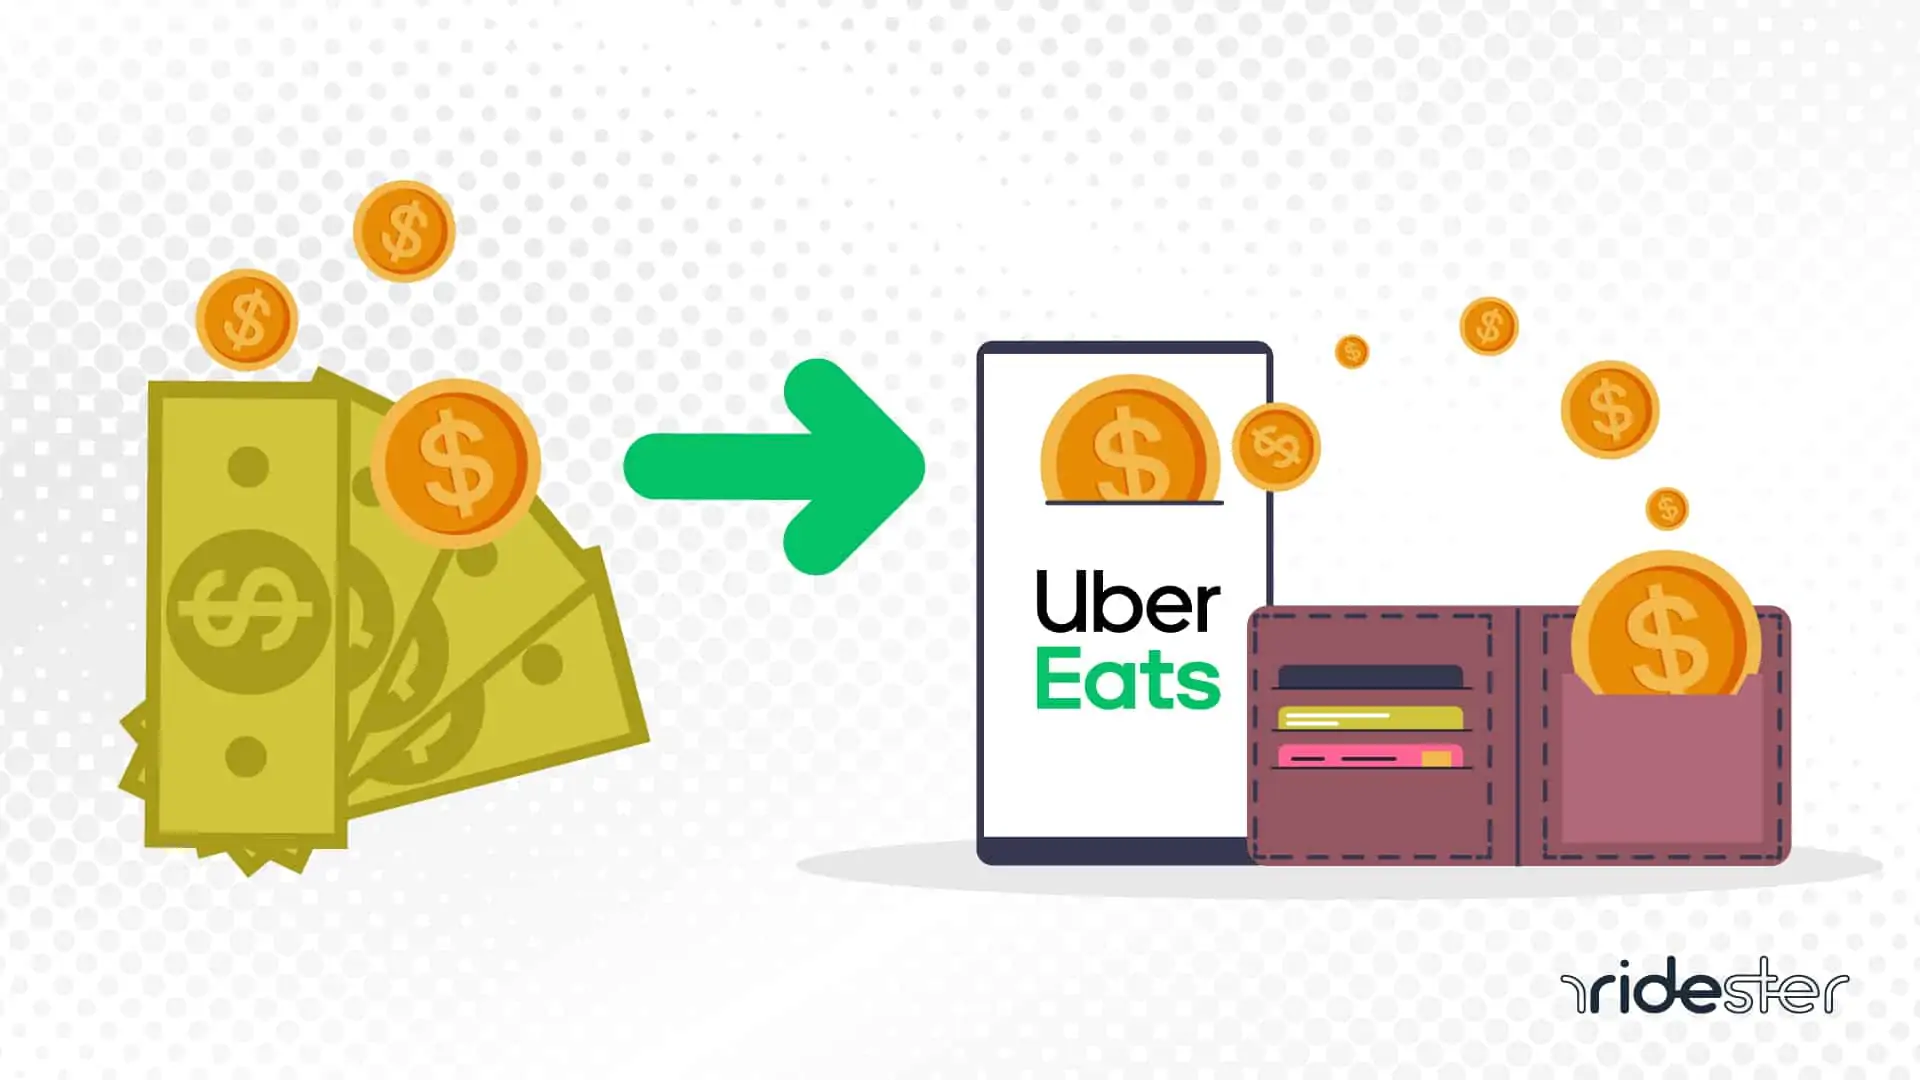 image for how to cancel uber eats order post showing money going from a mobile phone with the uber eats logo on the screen into a wallet